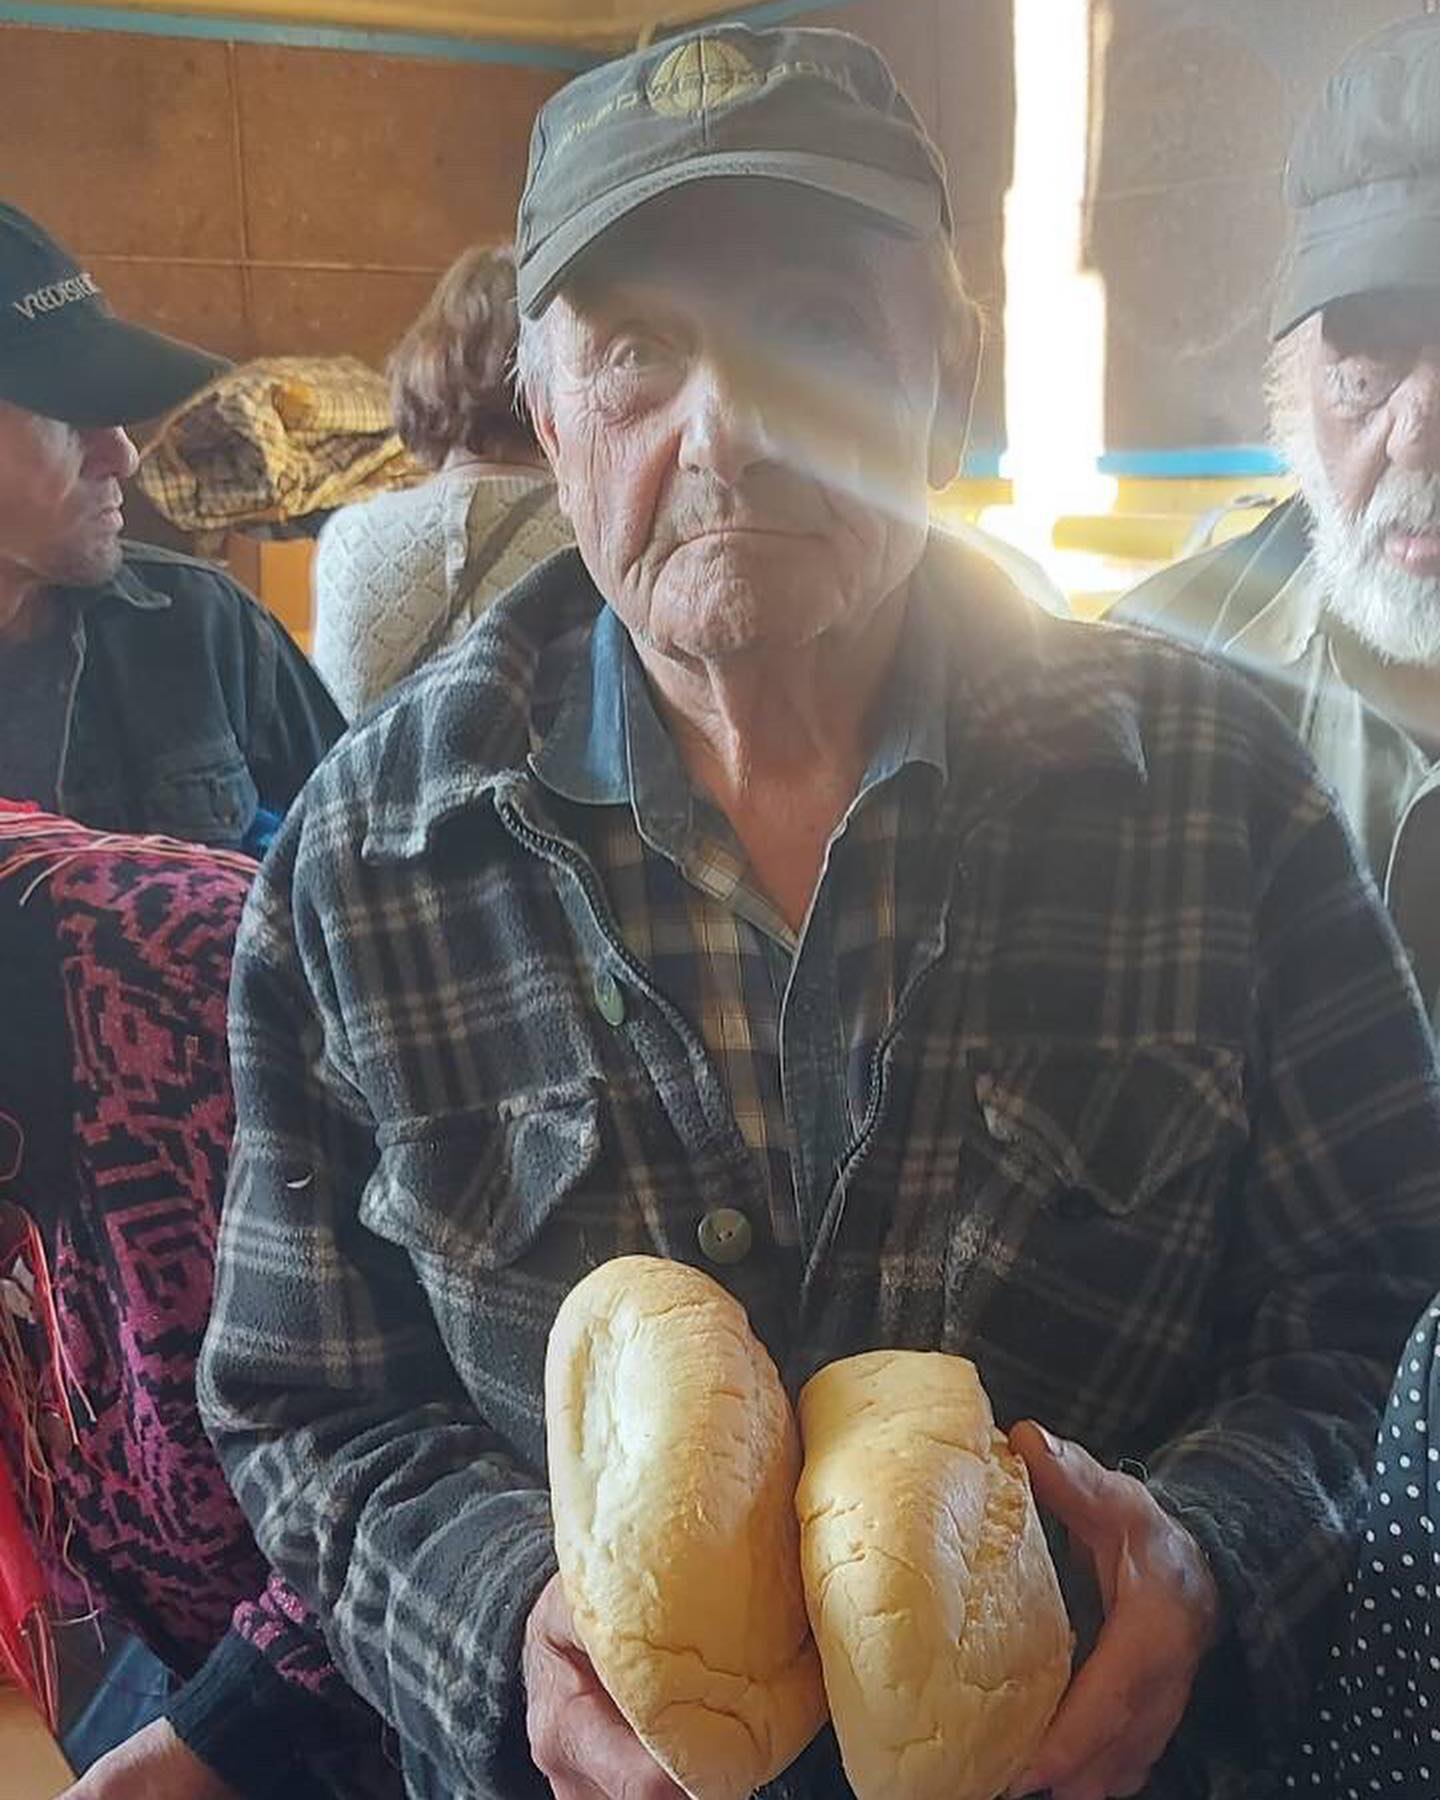 A group of people holding bread in their hands.